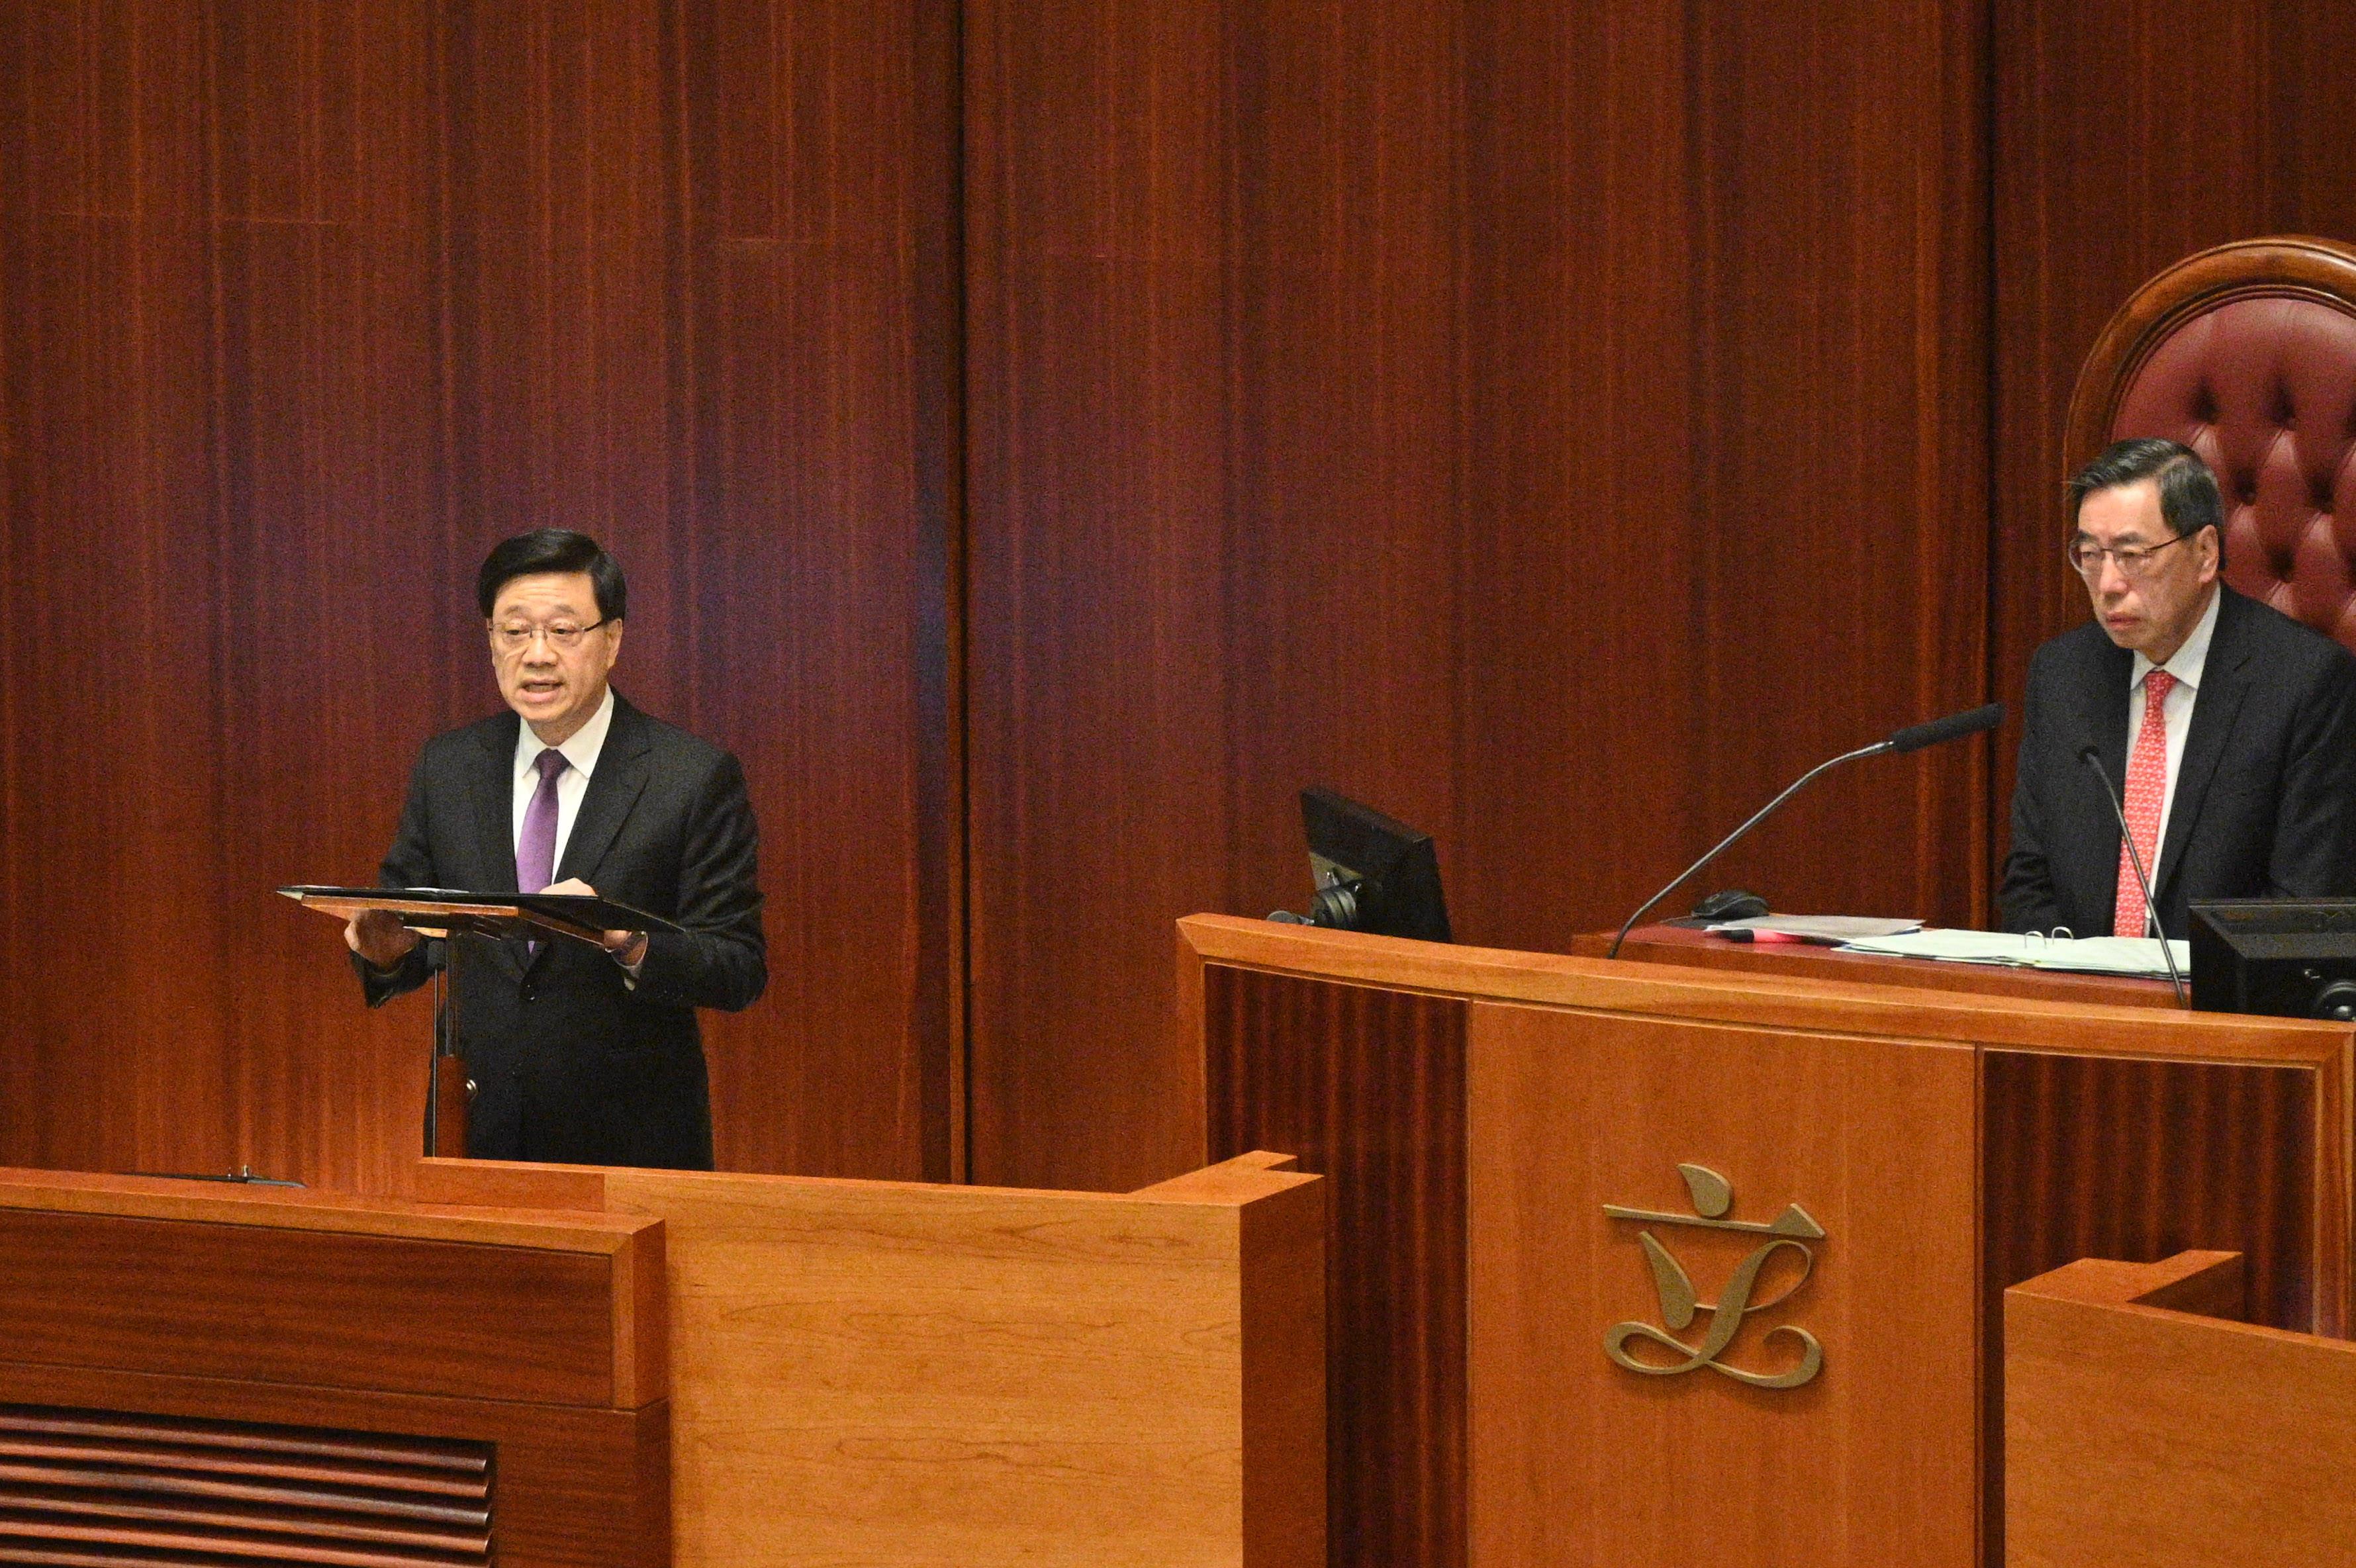 The Chief Executive, Mr John Lee (left), addresses at the Legislative Council (LegCo) meeting on the LegCo's passage of the Safeguarding National Security Bill today (March 19).